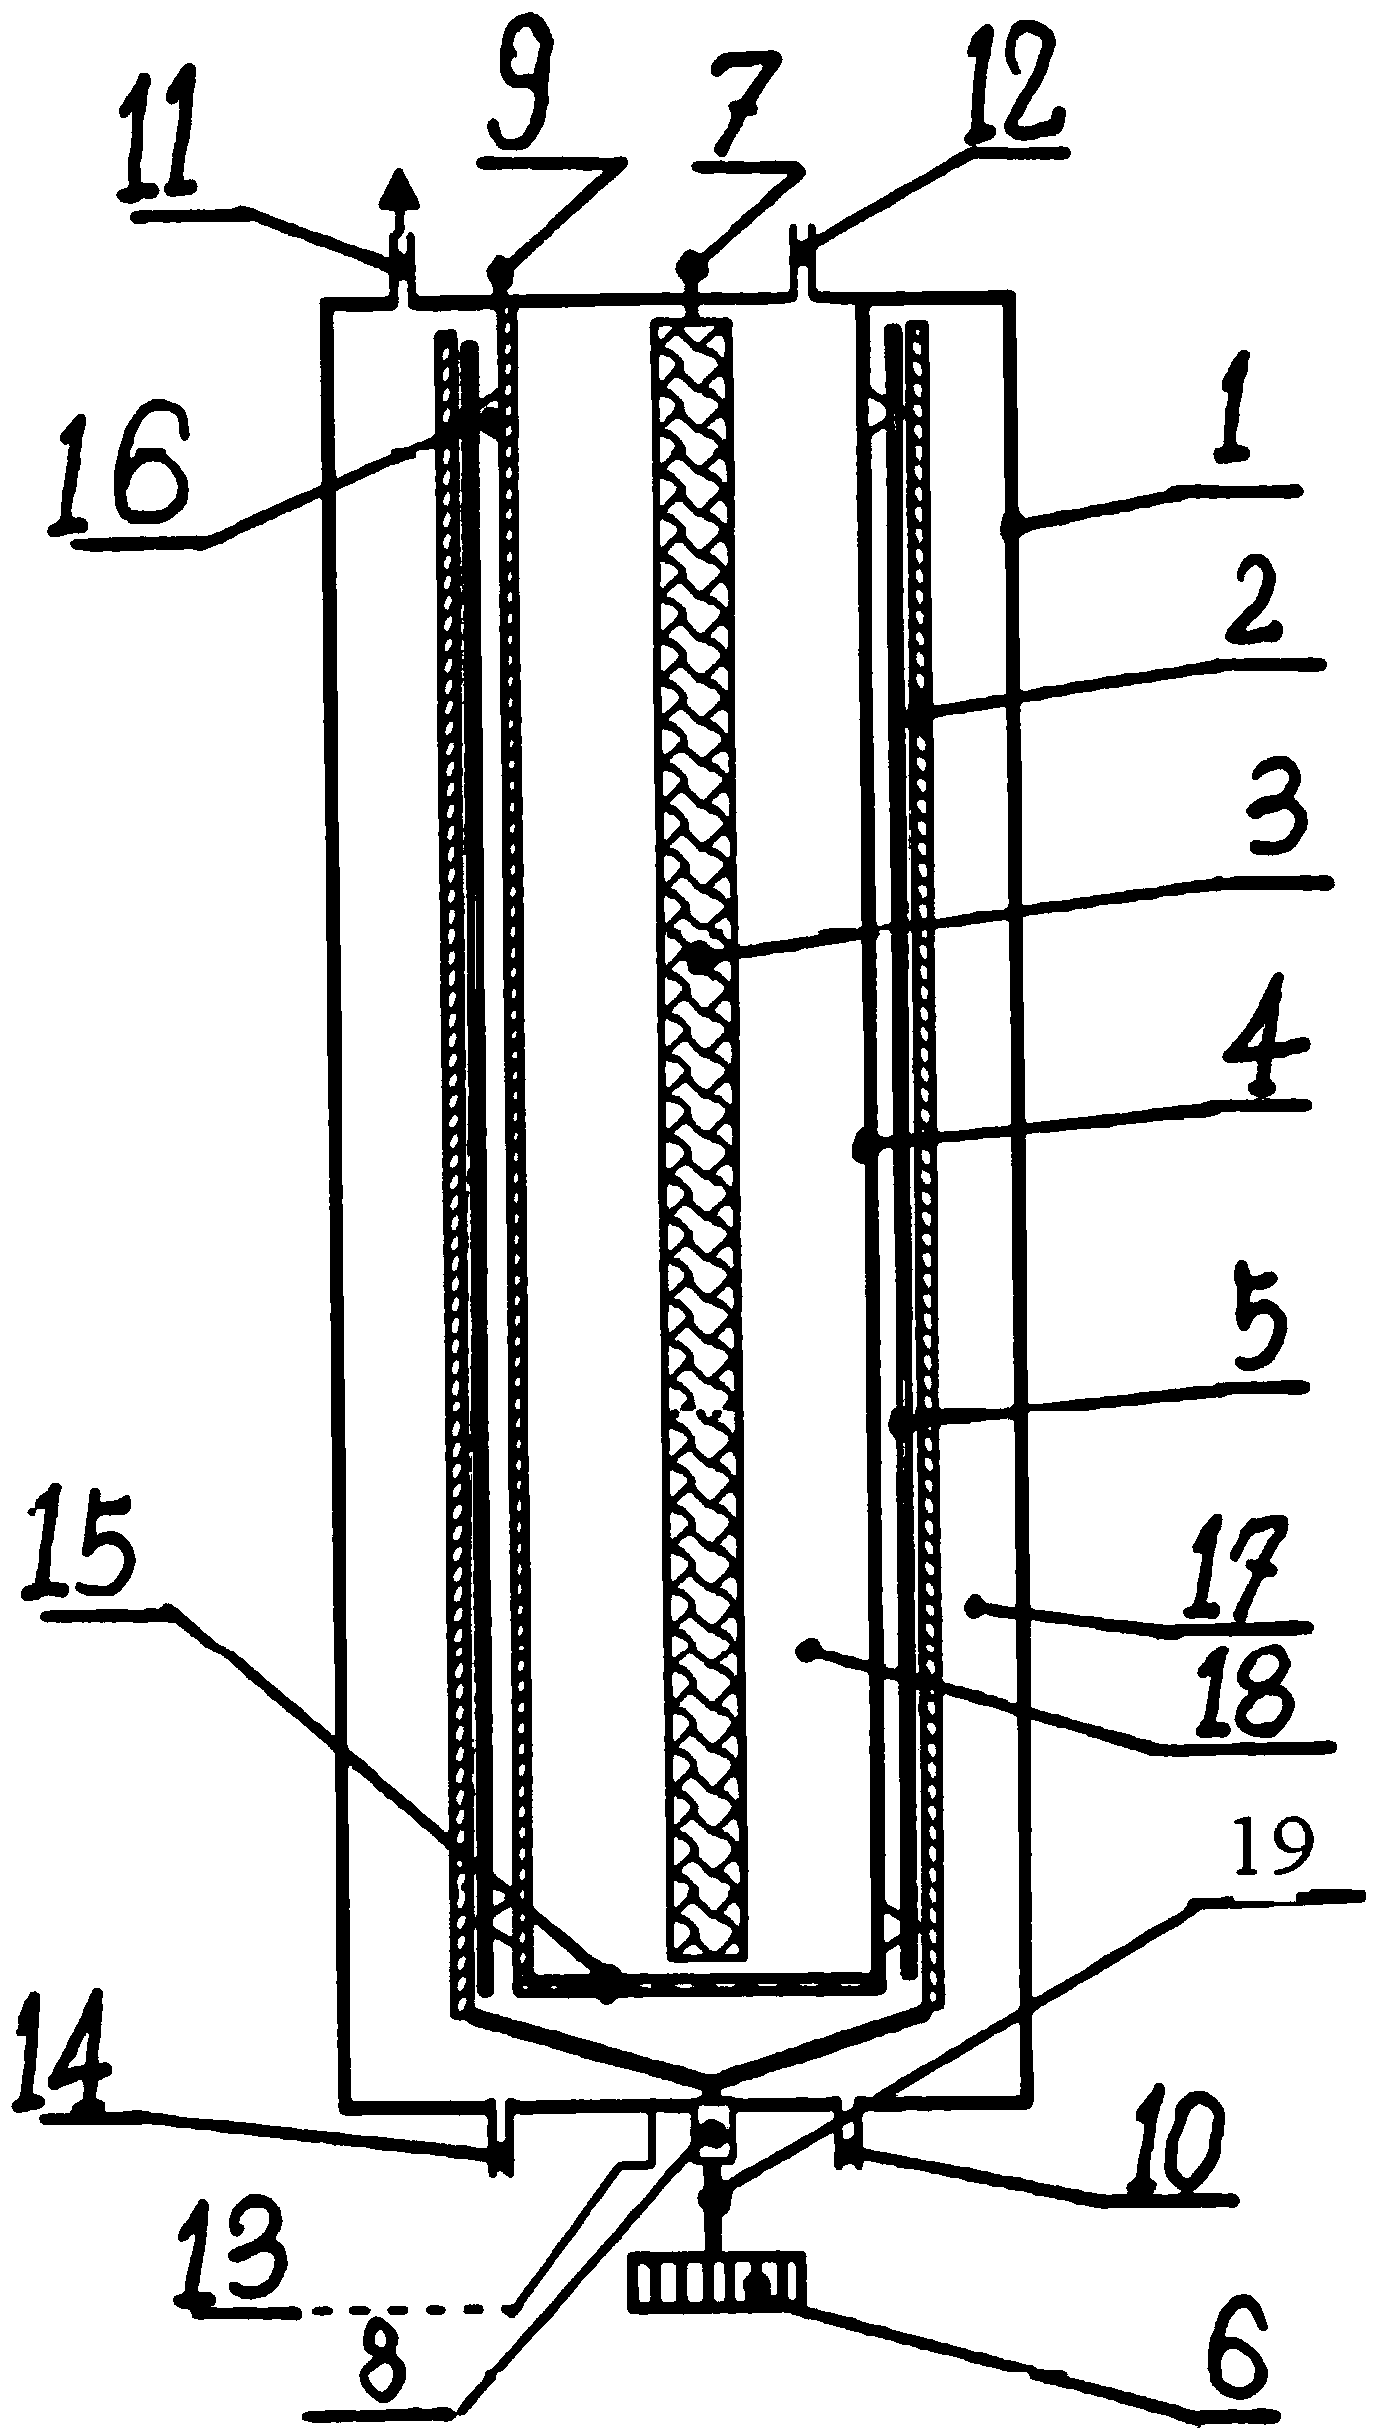 Electrochemical water scale removal device